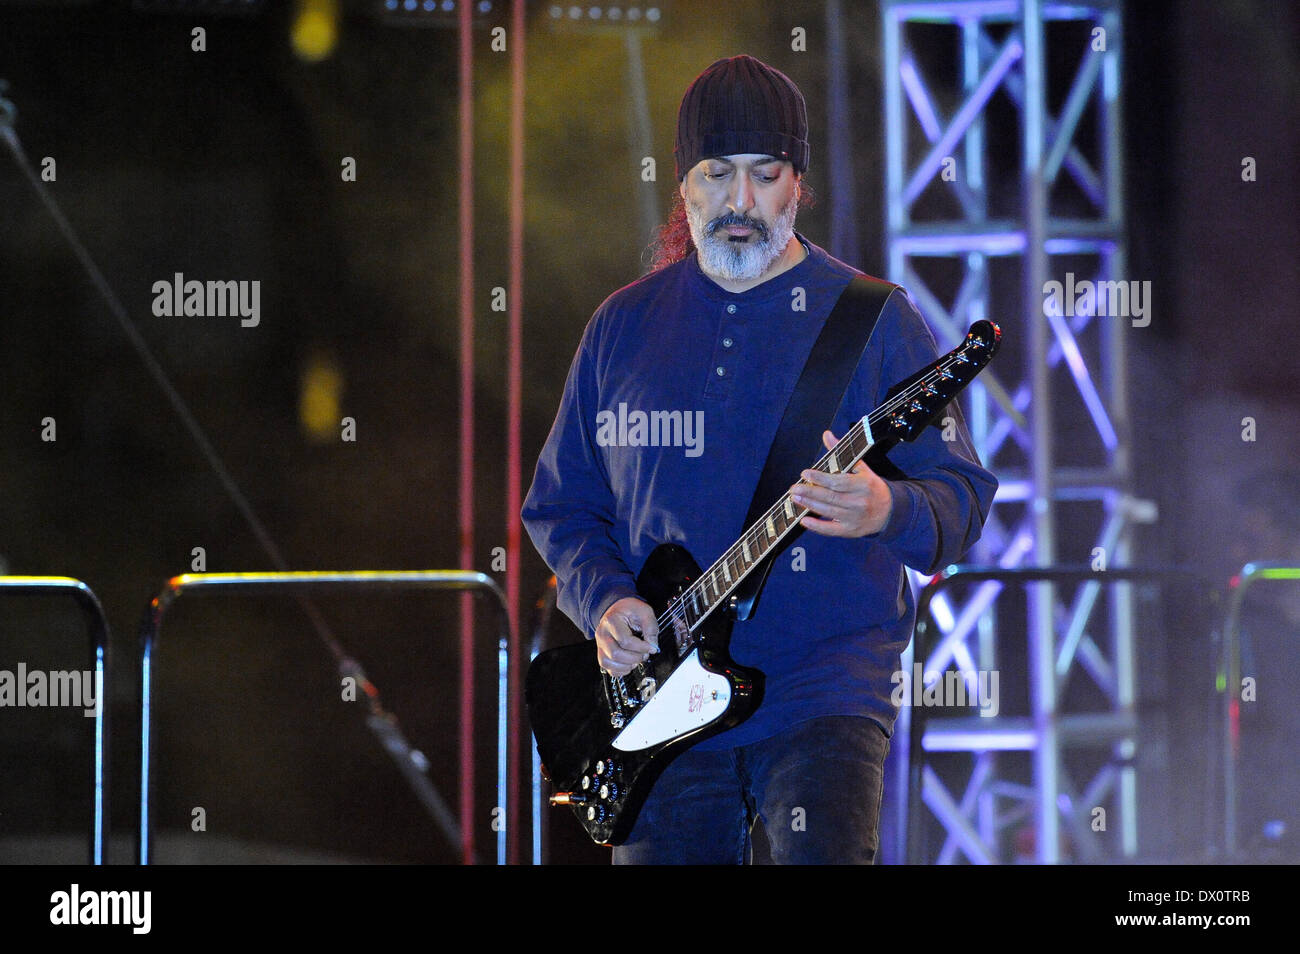 Austin, Texas, USA. 14th Mar, 2014. Kim Thayil of Soundgarden performs in concert at the Guitar Center Direct TV live stream show from a roof top party during South By Southwest (SXSW) on March 14, 2014 in Austin, Texas - USA (Photo by Manuel Nauta/NurPhoto) © Manuel Nauta/NurPhoto/ZUMAPRESS.com/Alamy Live News Stock Photo